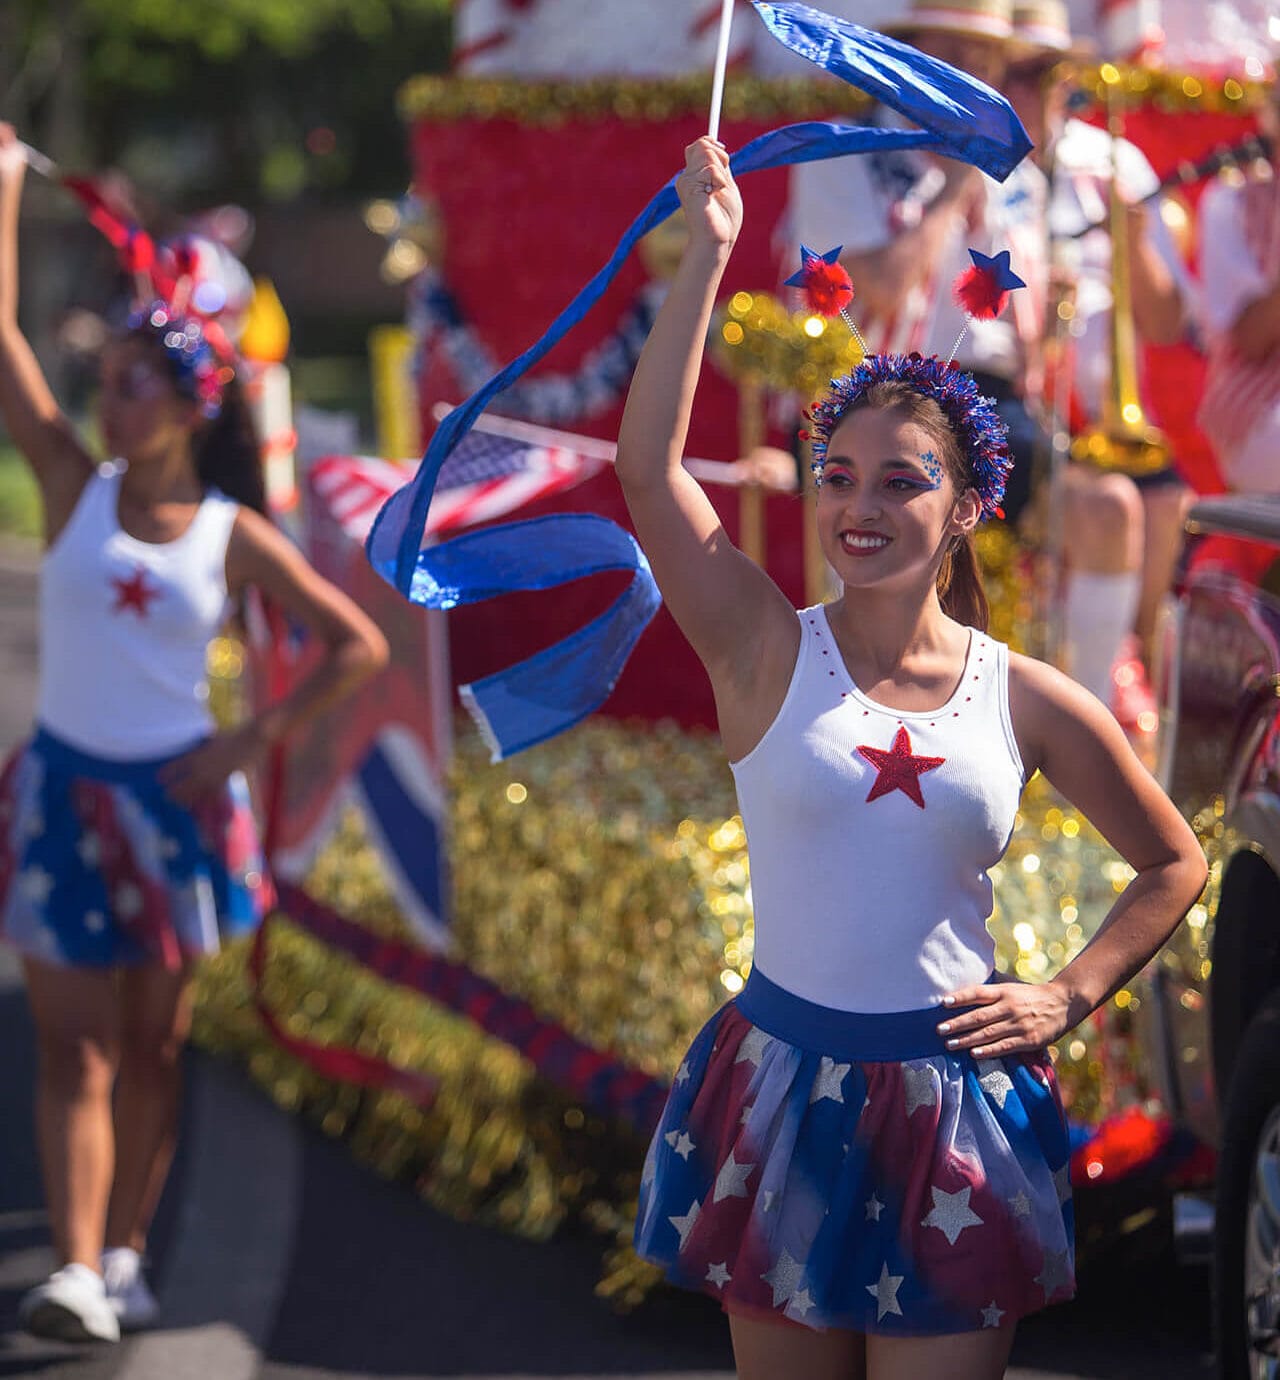 The Summerlin Council Patriotic Parade is set to continue its tradition of huge family fun and spirited, colorful patriotism.